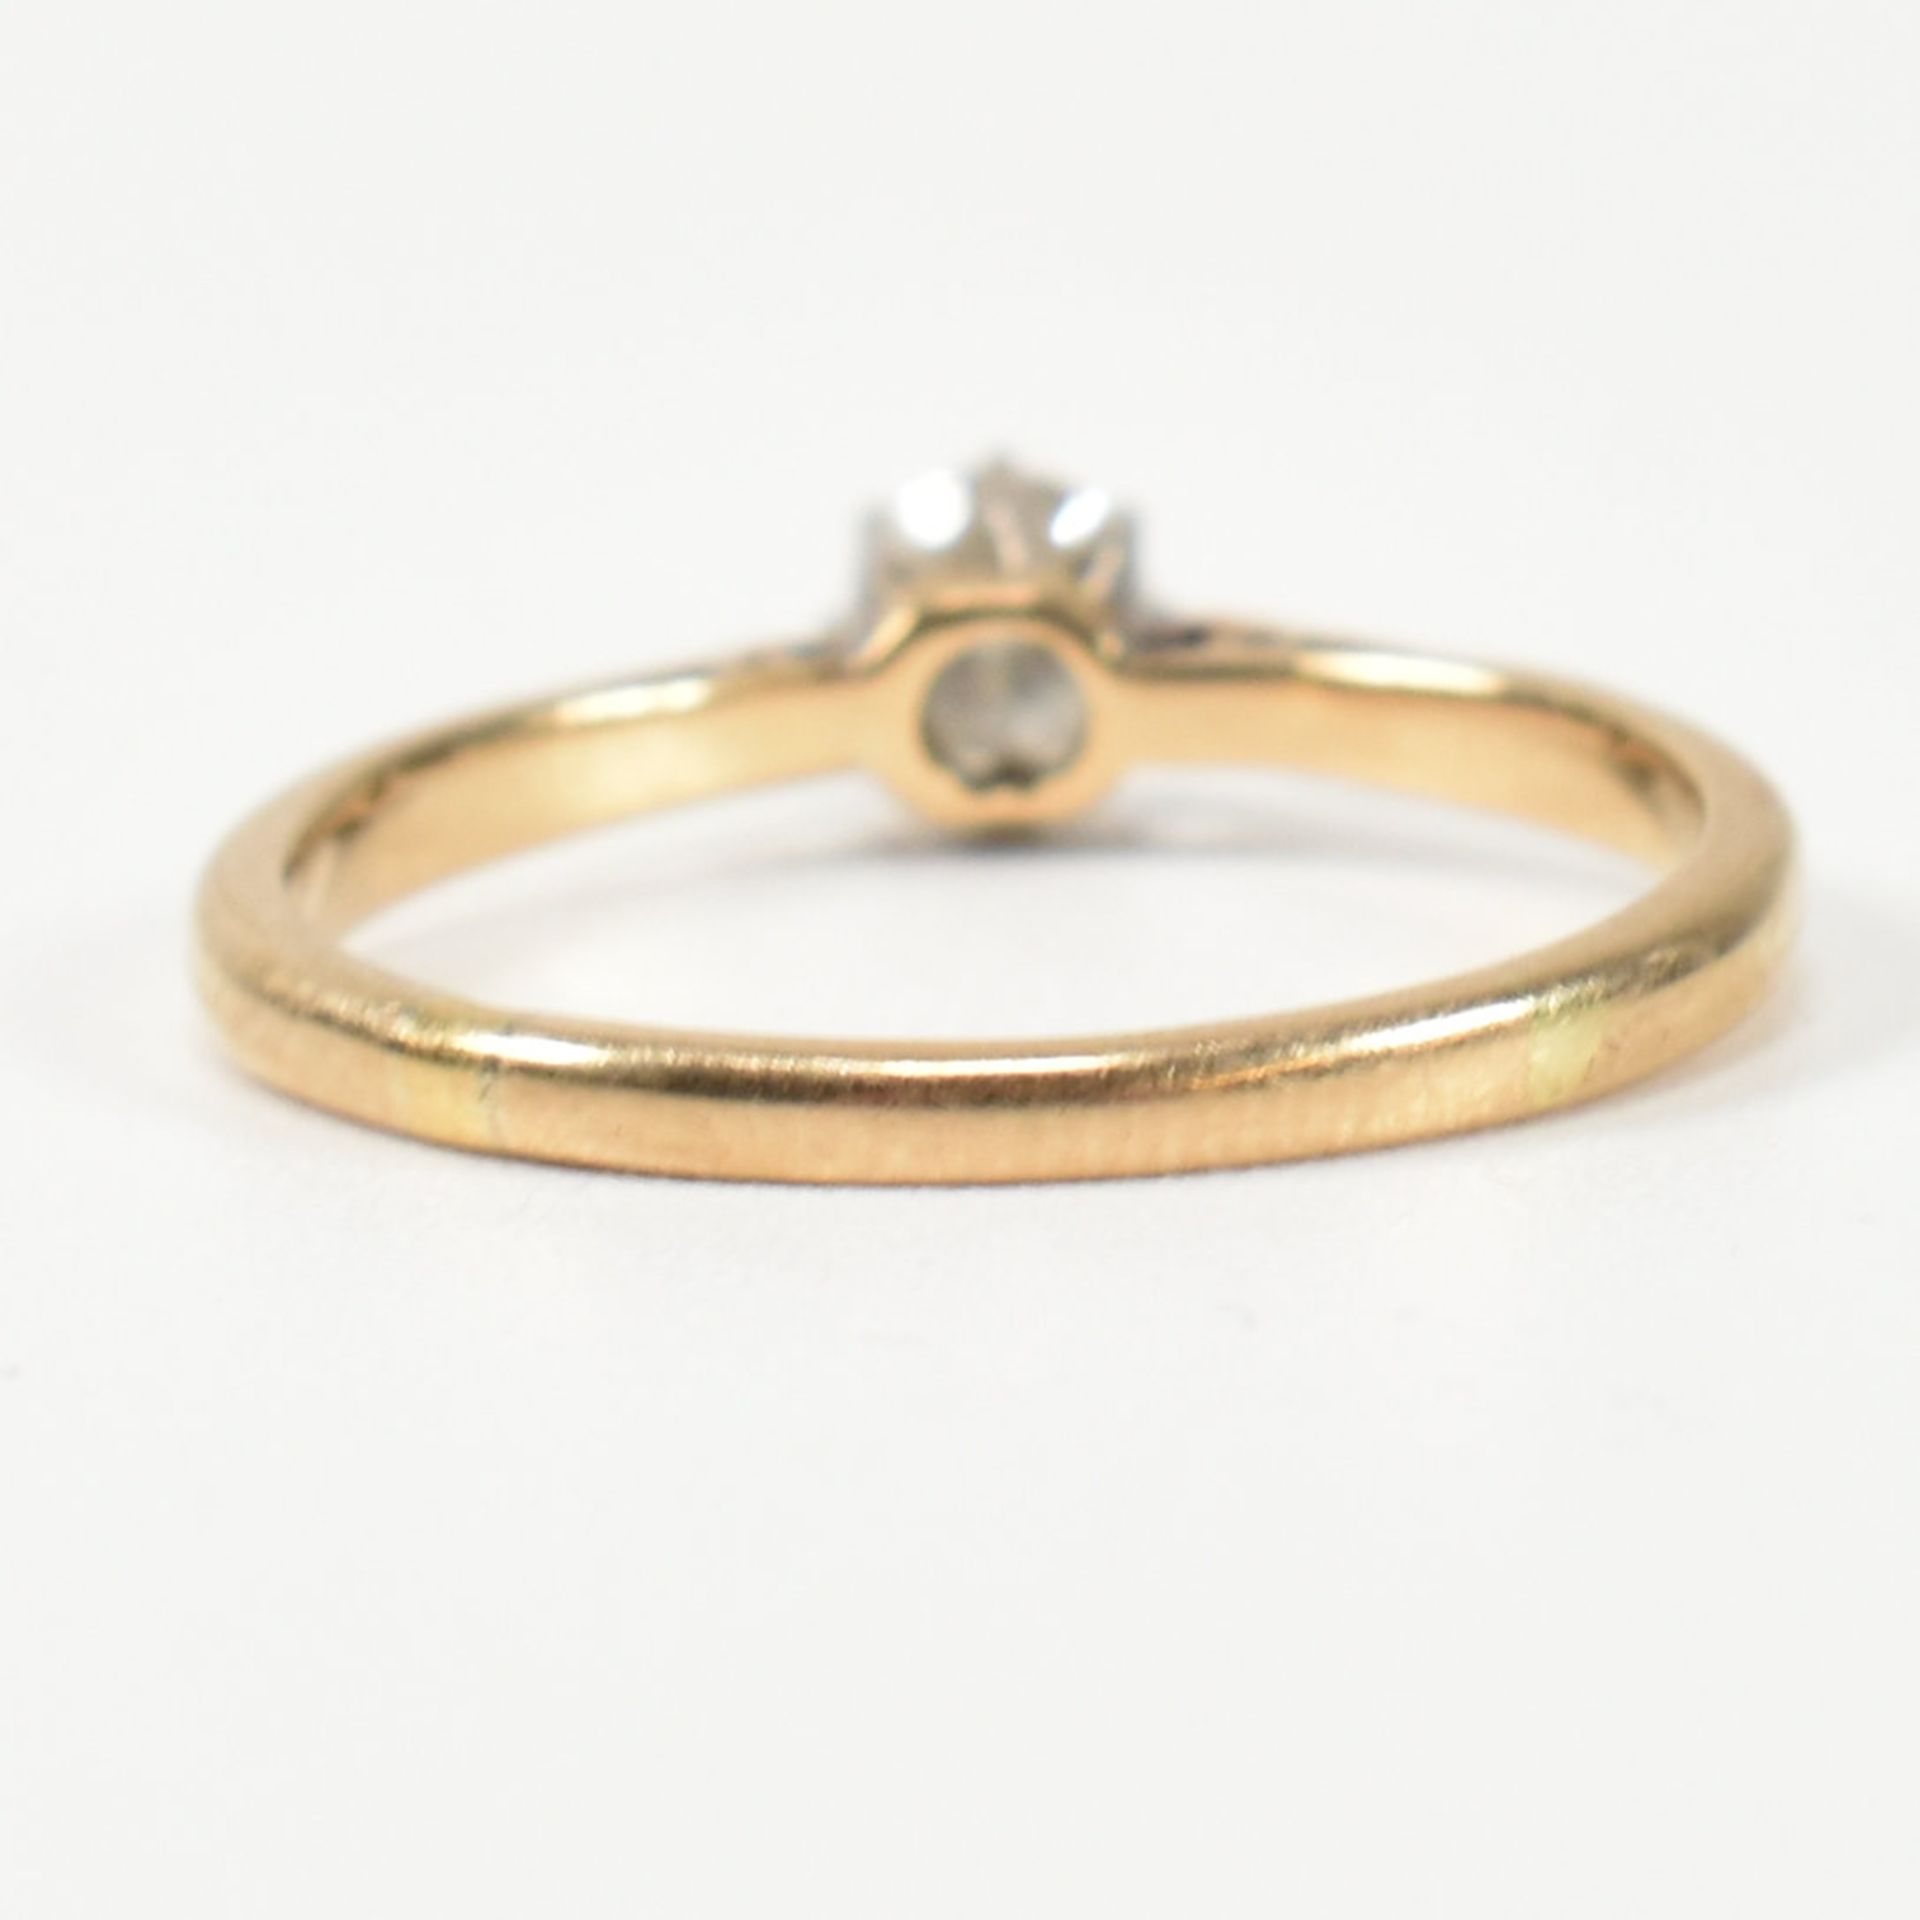 18CT GOLD & DIAMOND SOLITAIRE RING - Image 6 of 8